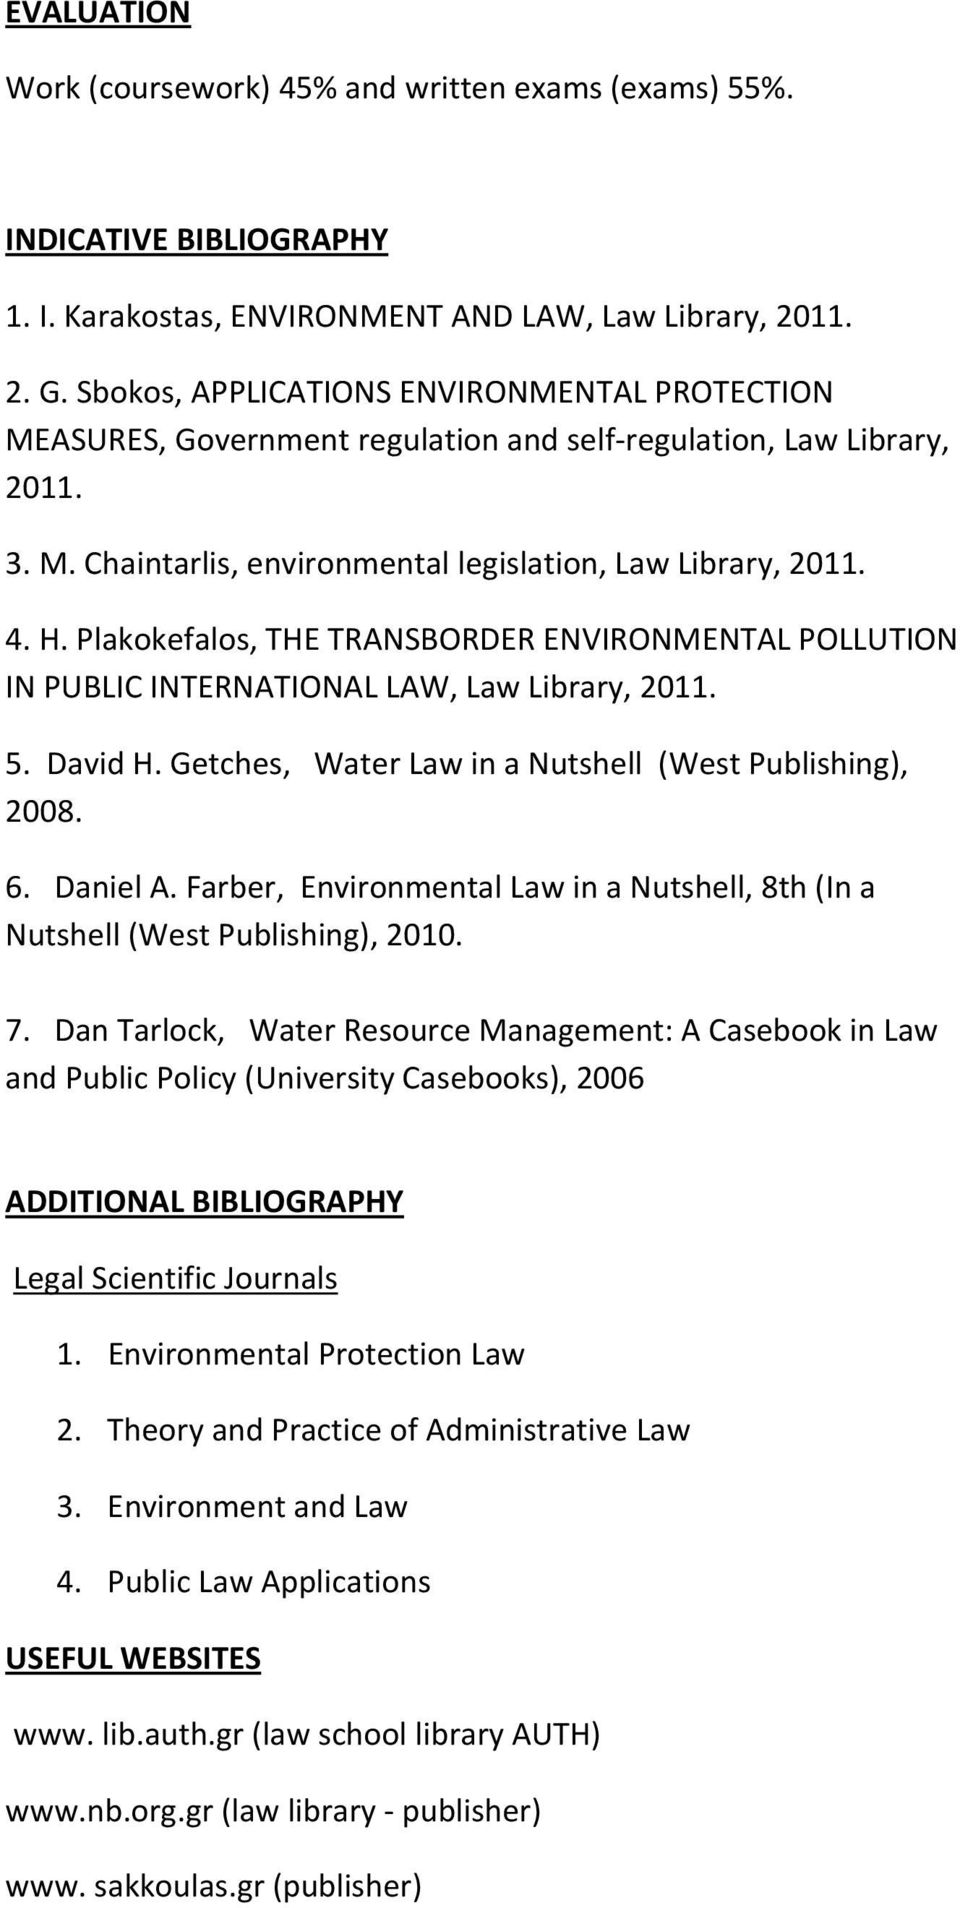 Plakokefalos, THE TRANSBORDER ENVIRONMENTAL POLLUTION IN PUBLIC INTERNATIONAL LAW, Law Library, 2011. 5. David H. Getches, Water Law in a Nutshell (West Publishing), 2008. 6. Daniel A.